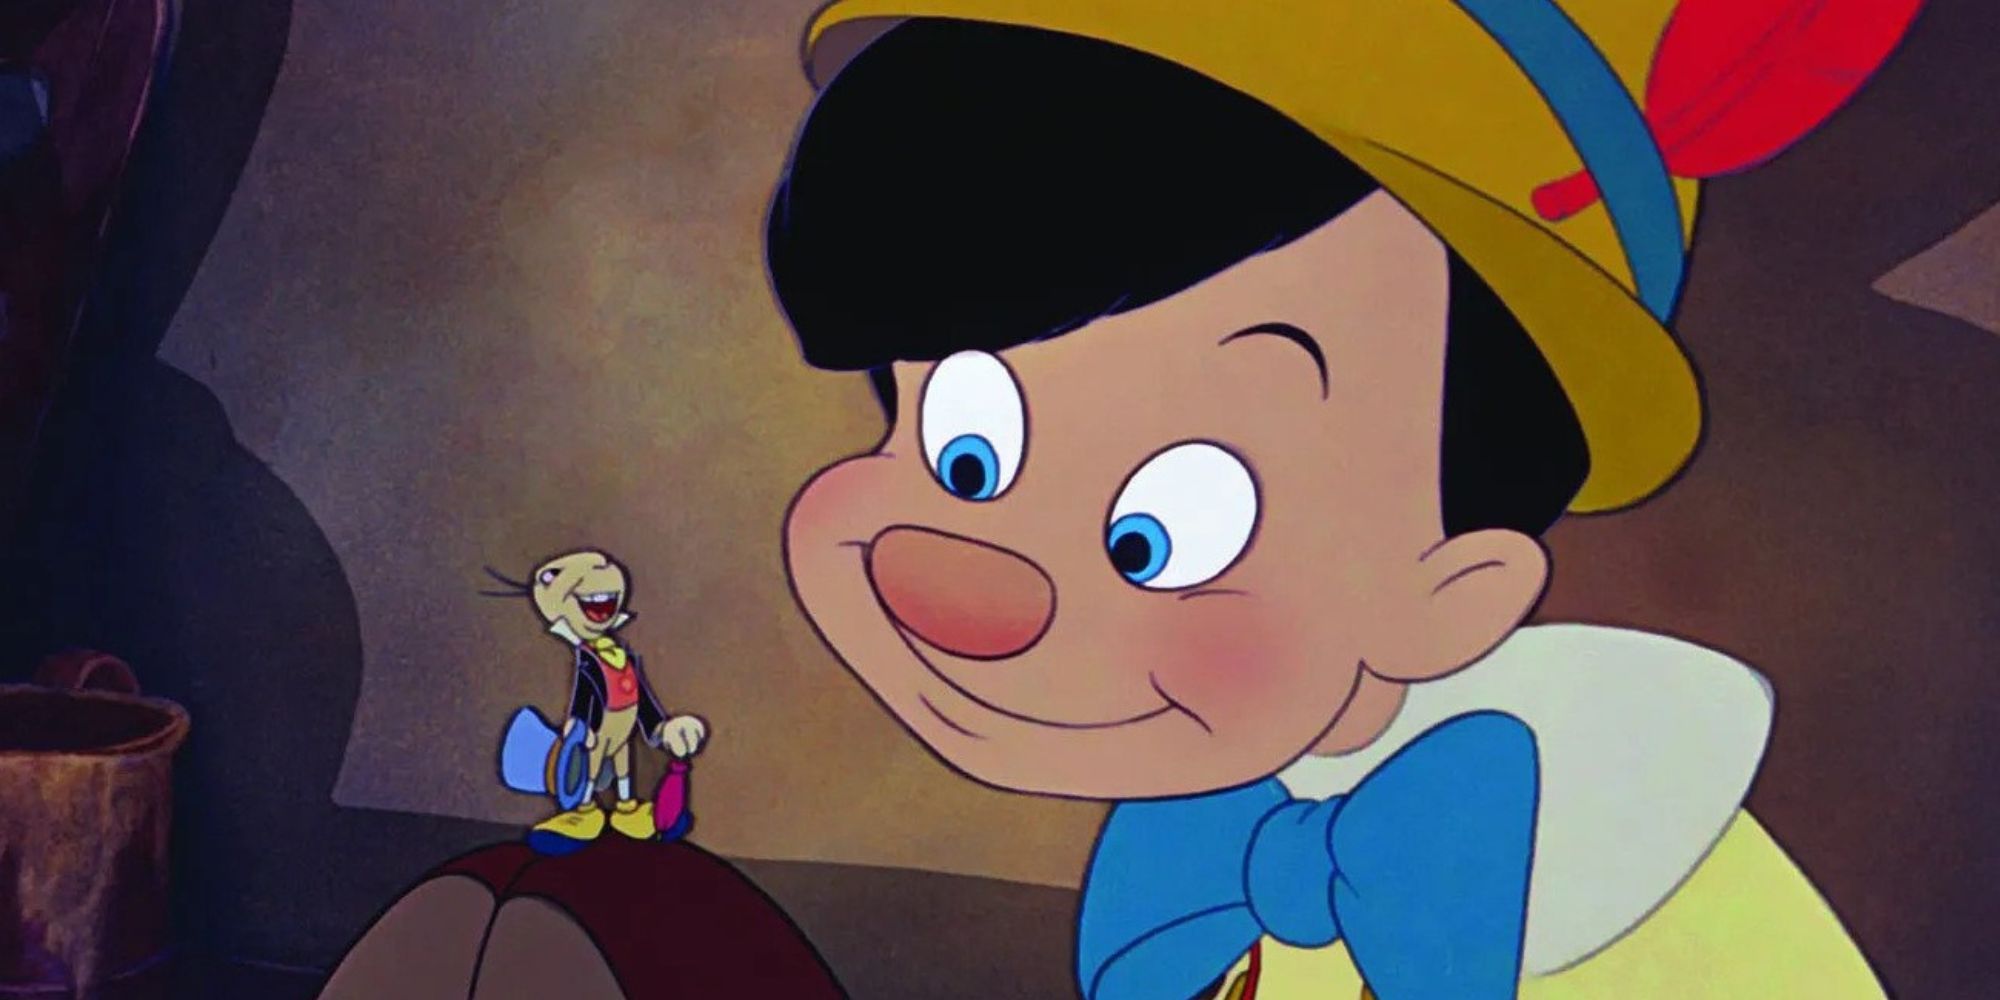 Pinocchio looking at Jiminy Cricket, who's standing on his knee, in Pinocchio